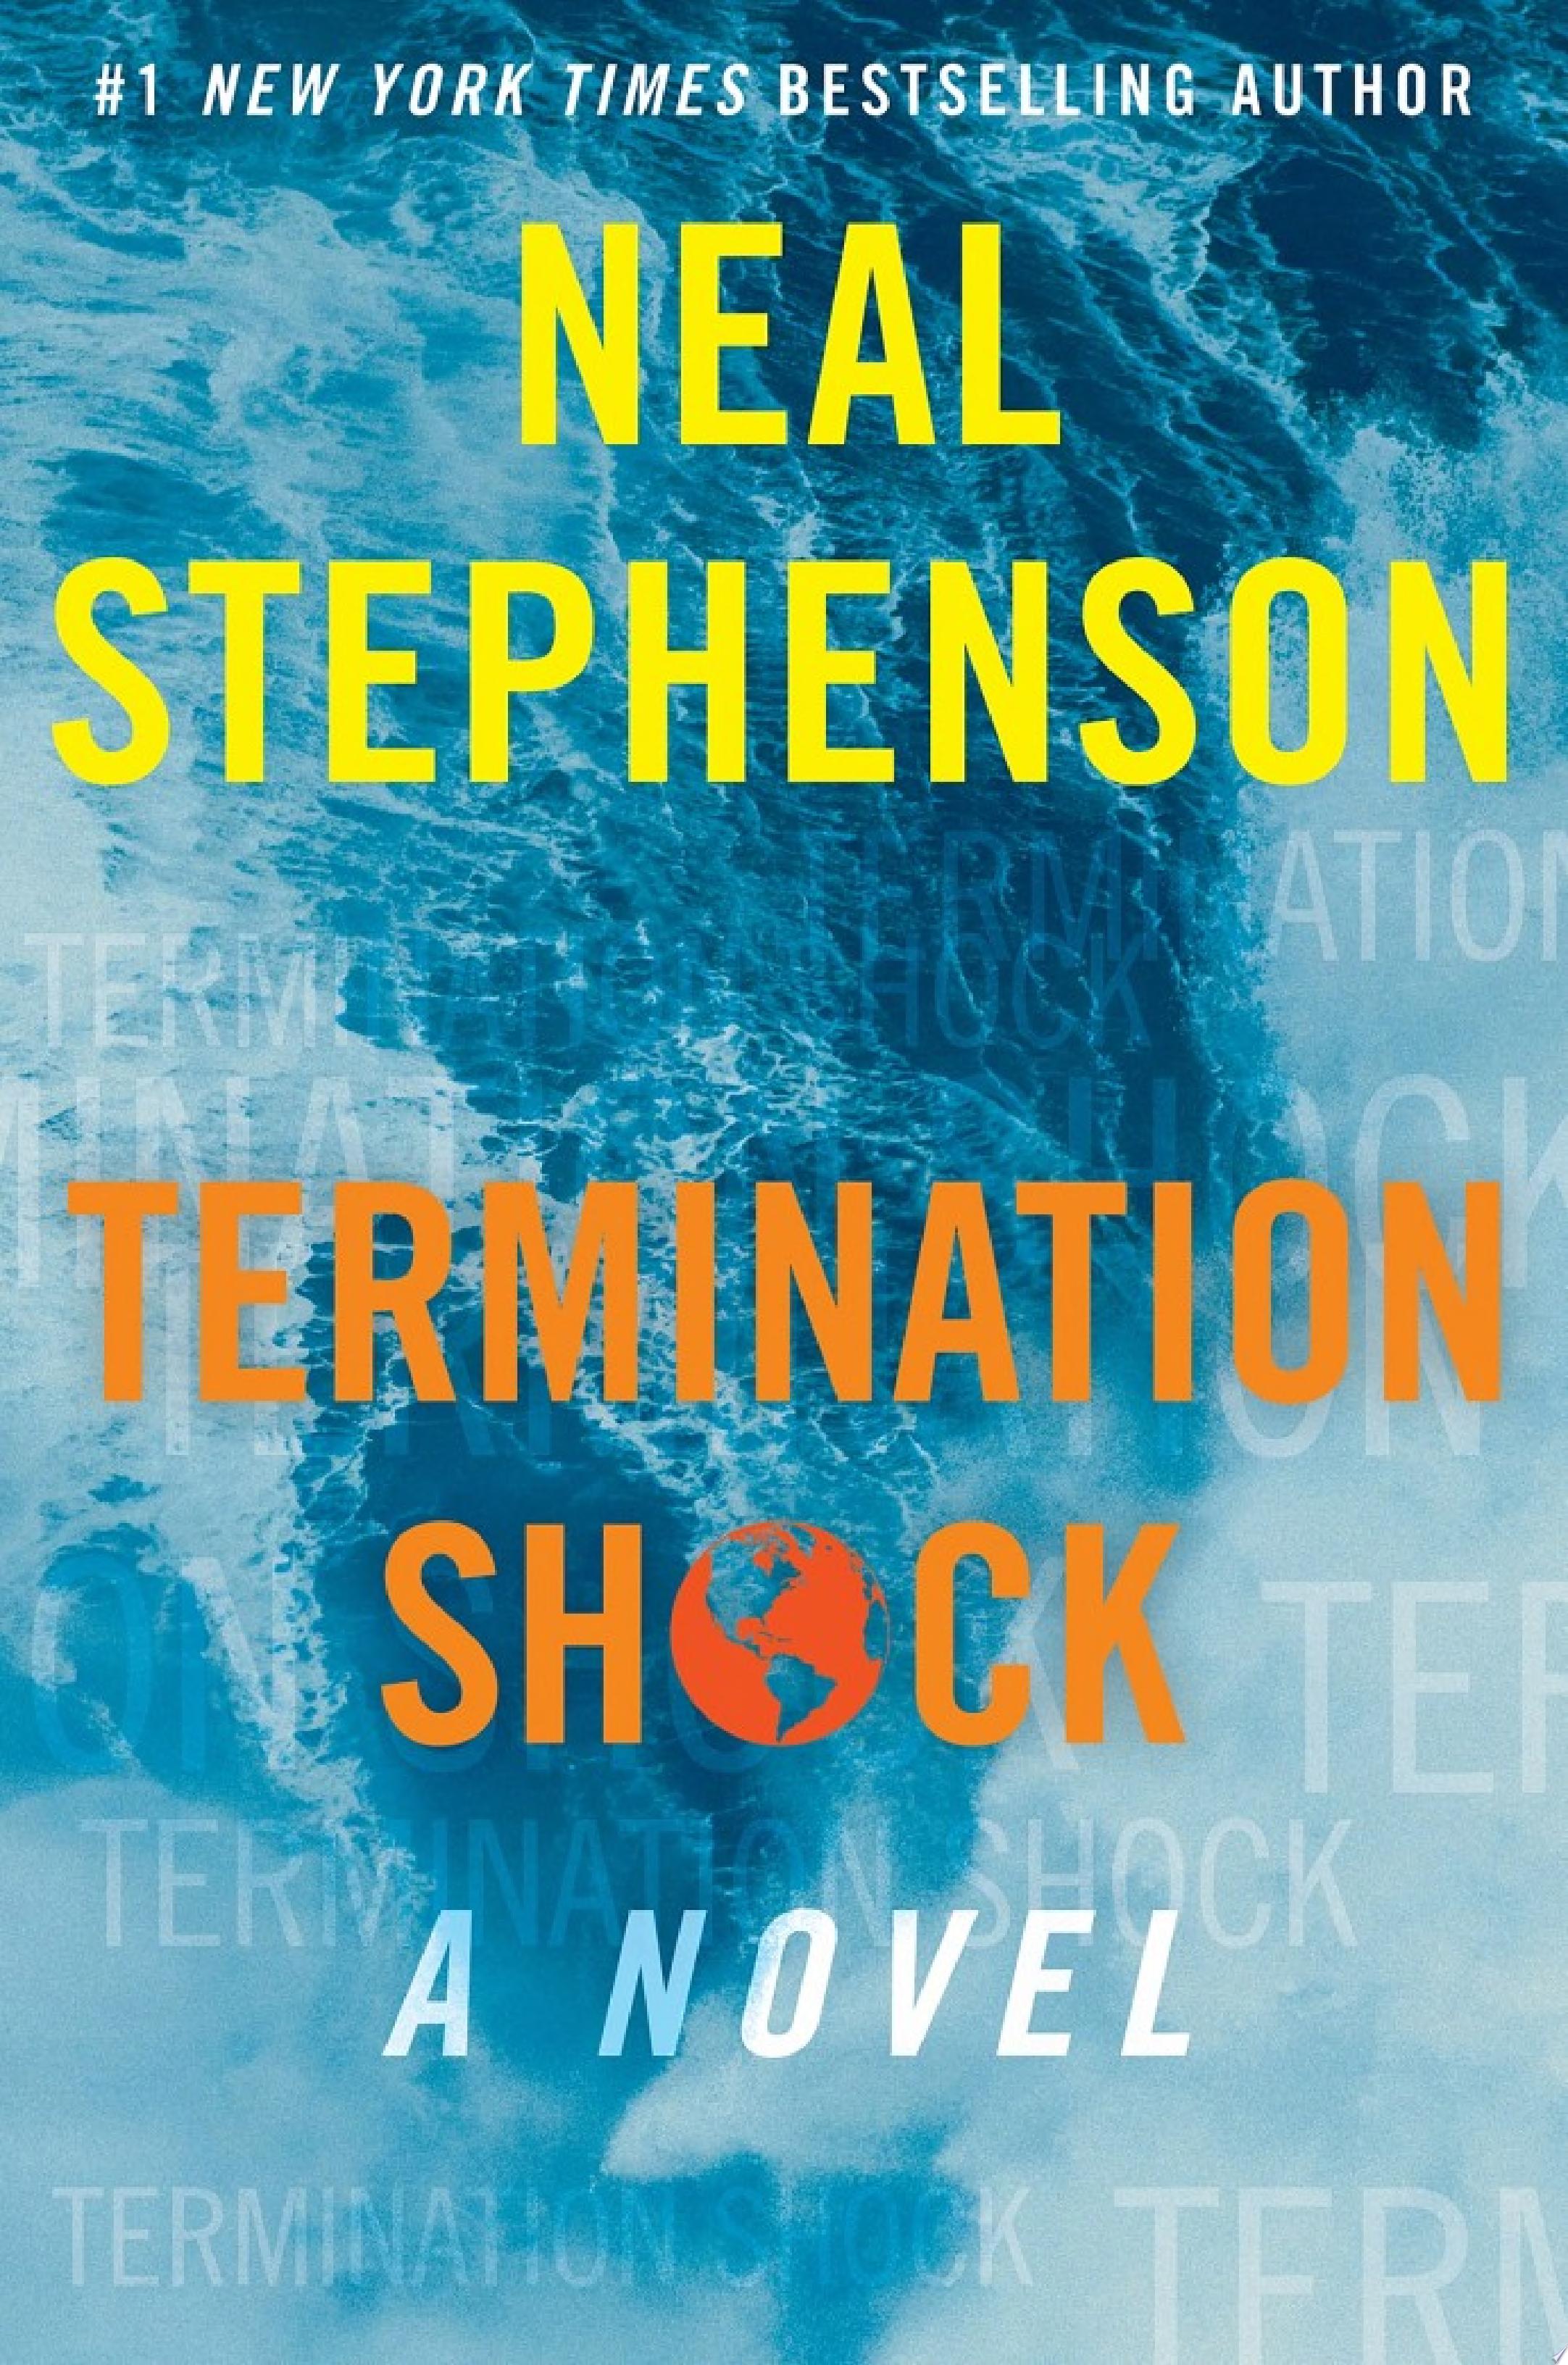 Image for "Termination Shock"